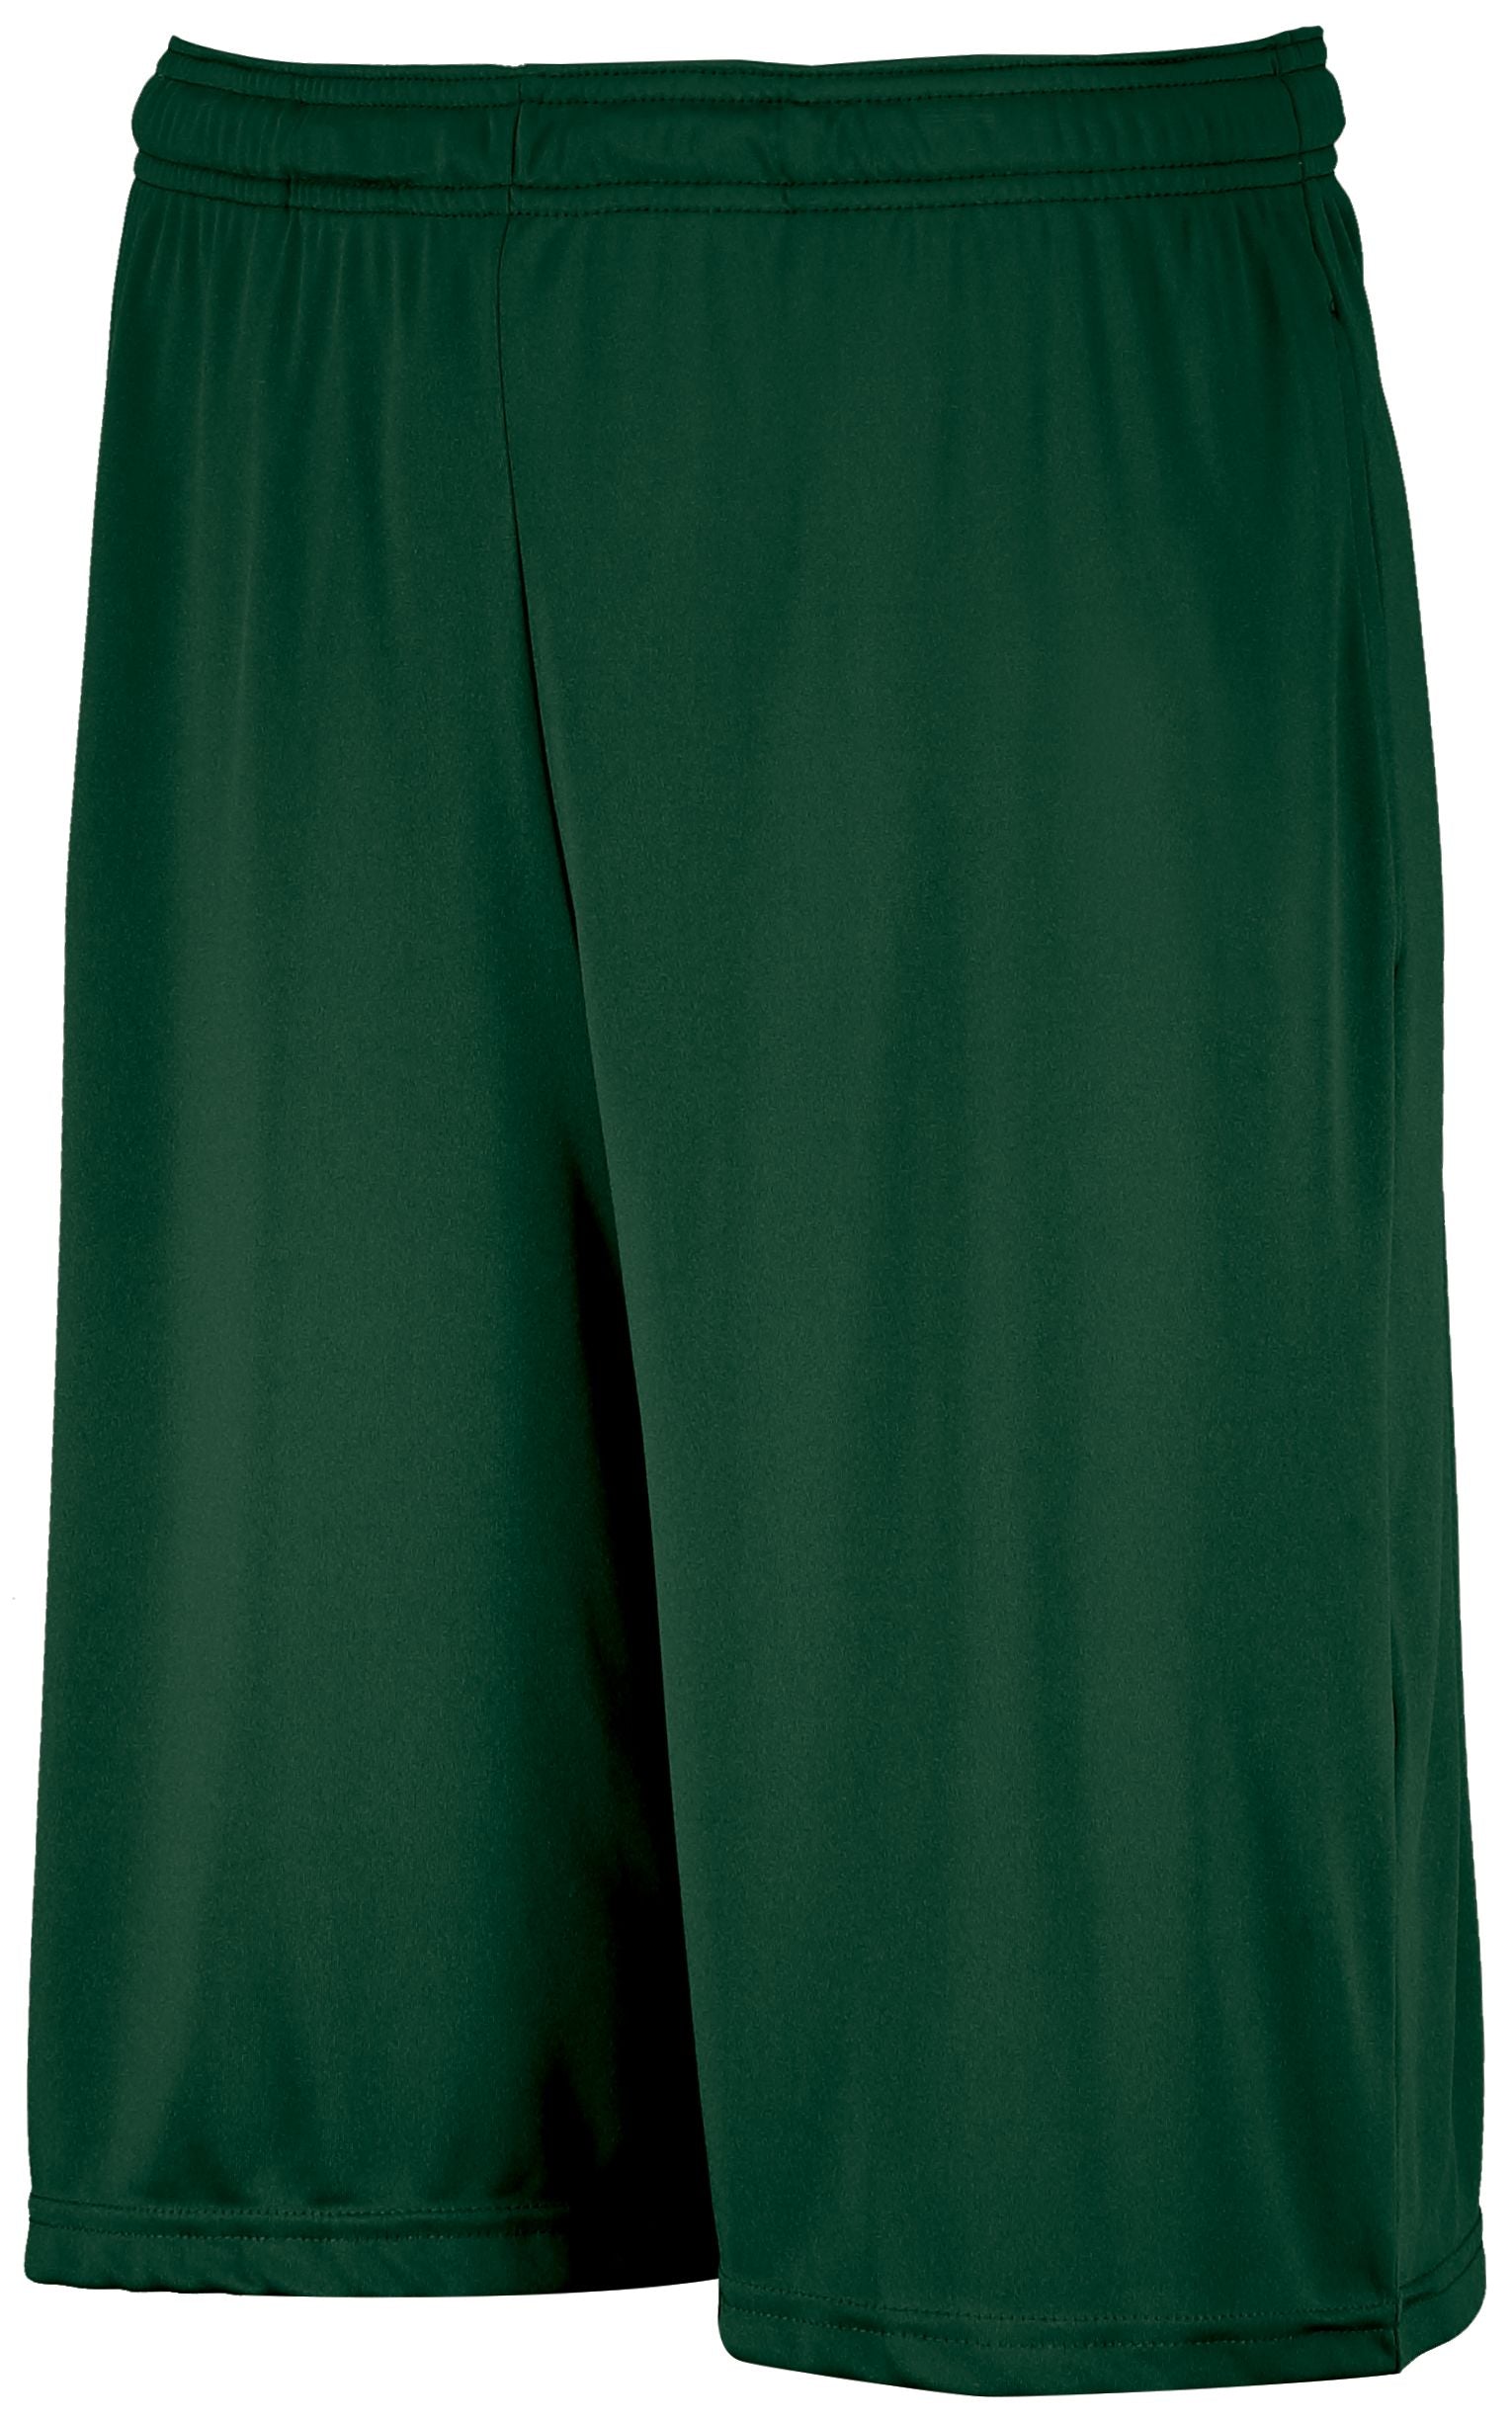 Russell Athletic Dri-Power Essential Performance Shorts With Pockets in Dark Green  -Part of the Adult, Adult-Shorts, Russell-Athletic-Products product lines at KanaleyCreations.com